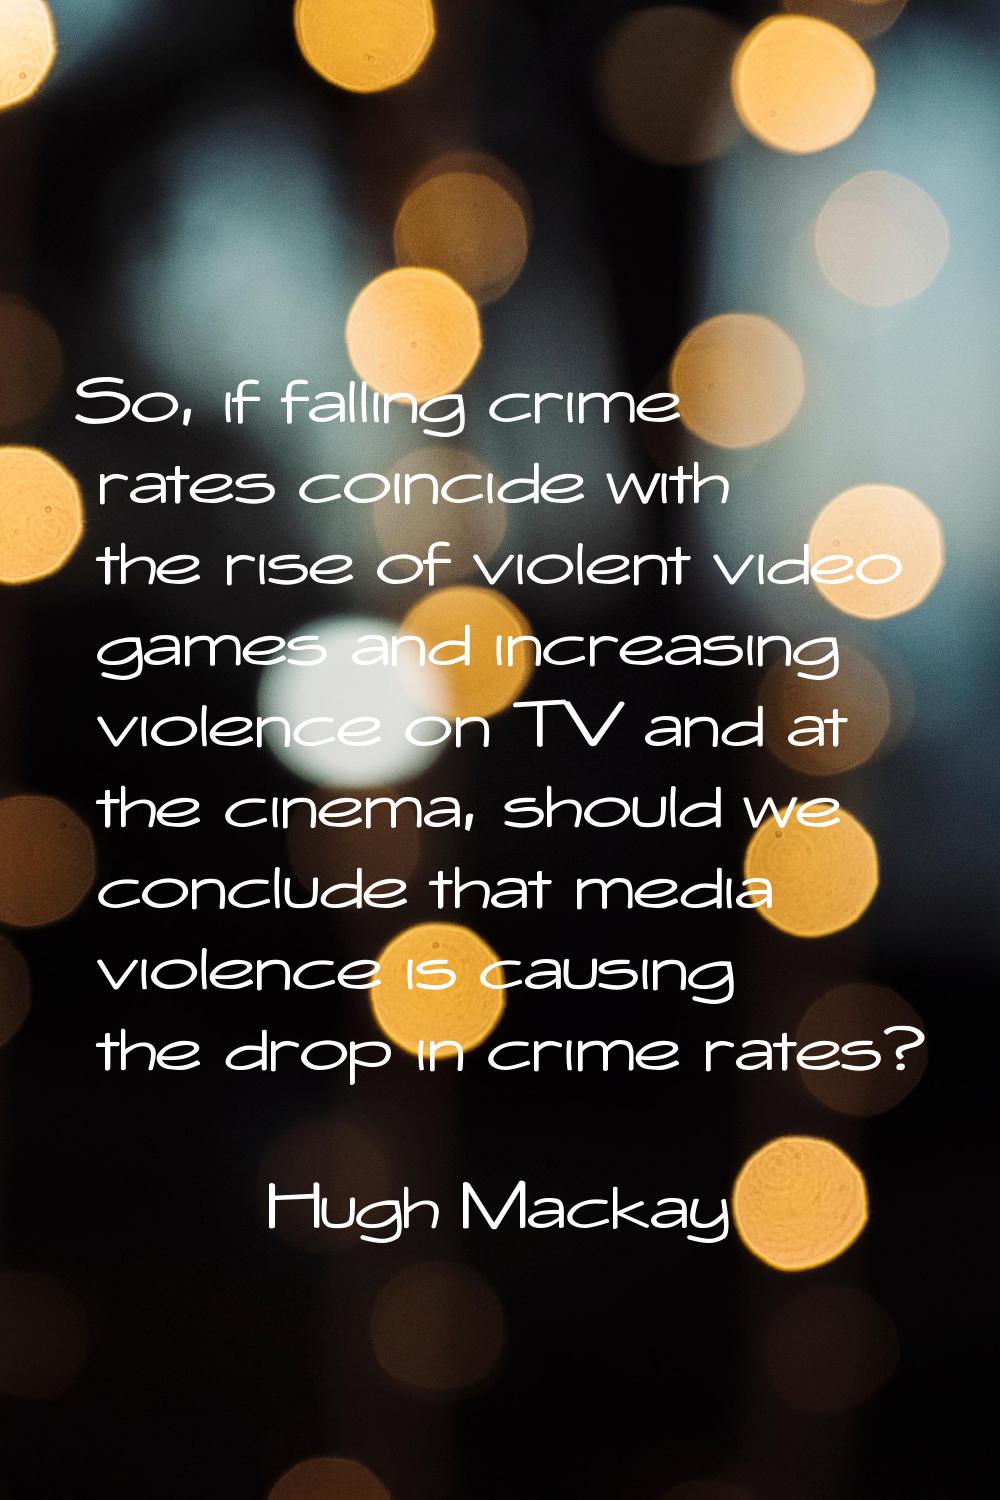 So, if falling crime rates coincide with the rise of violent video games and increasing violence on